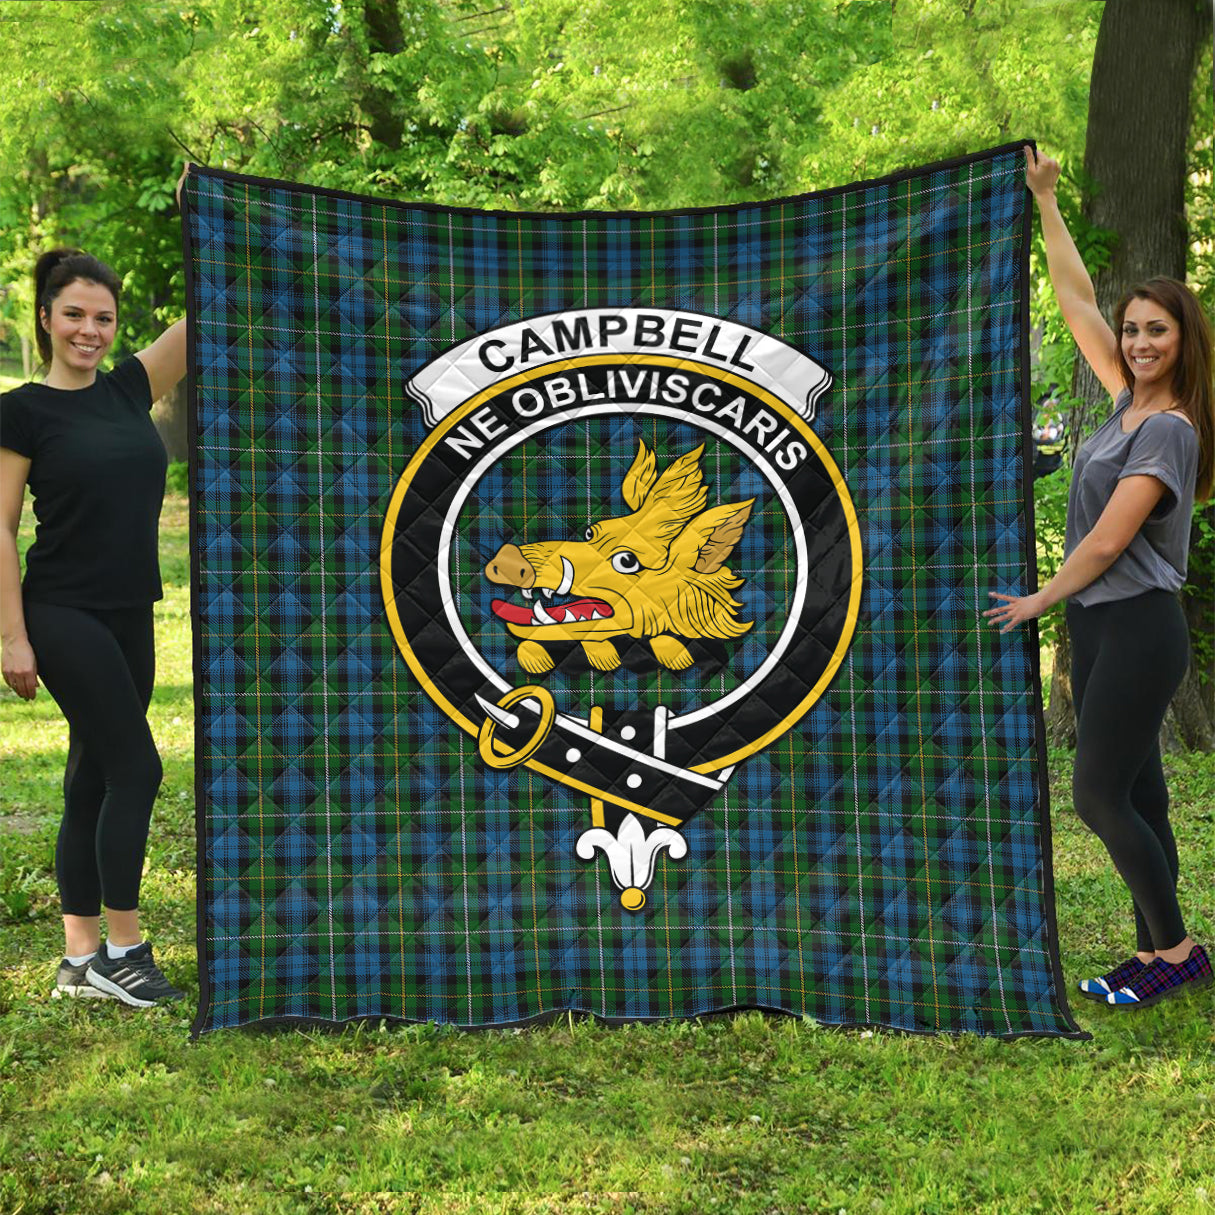 campbell-of-argyll-02-tartan-quilt-with-family-crest